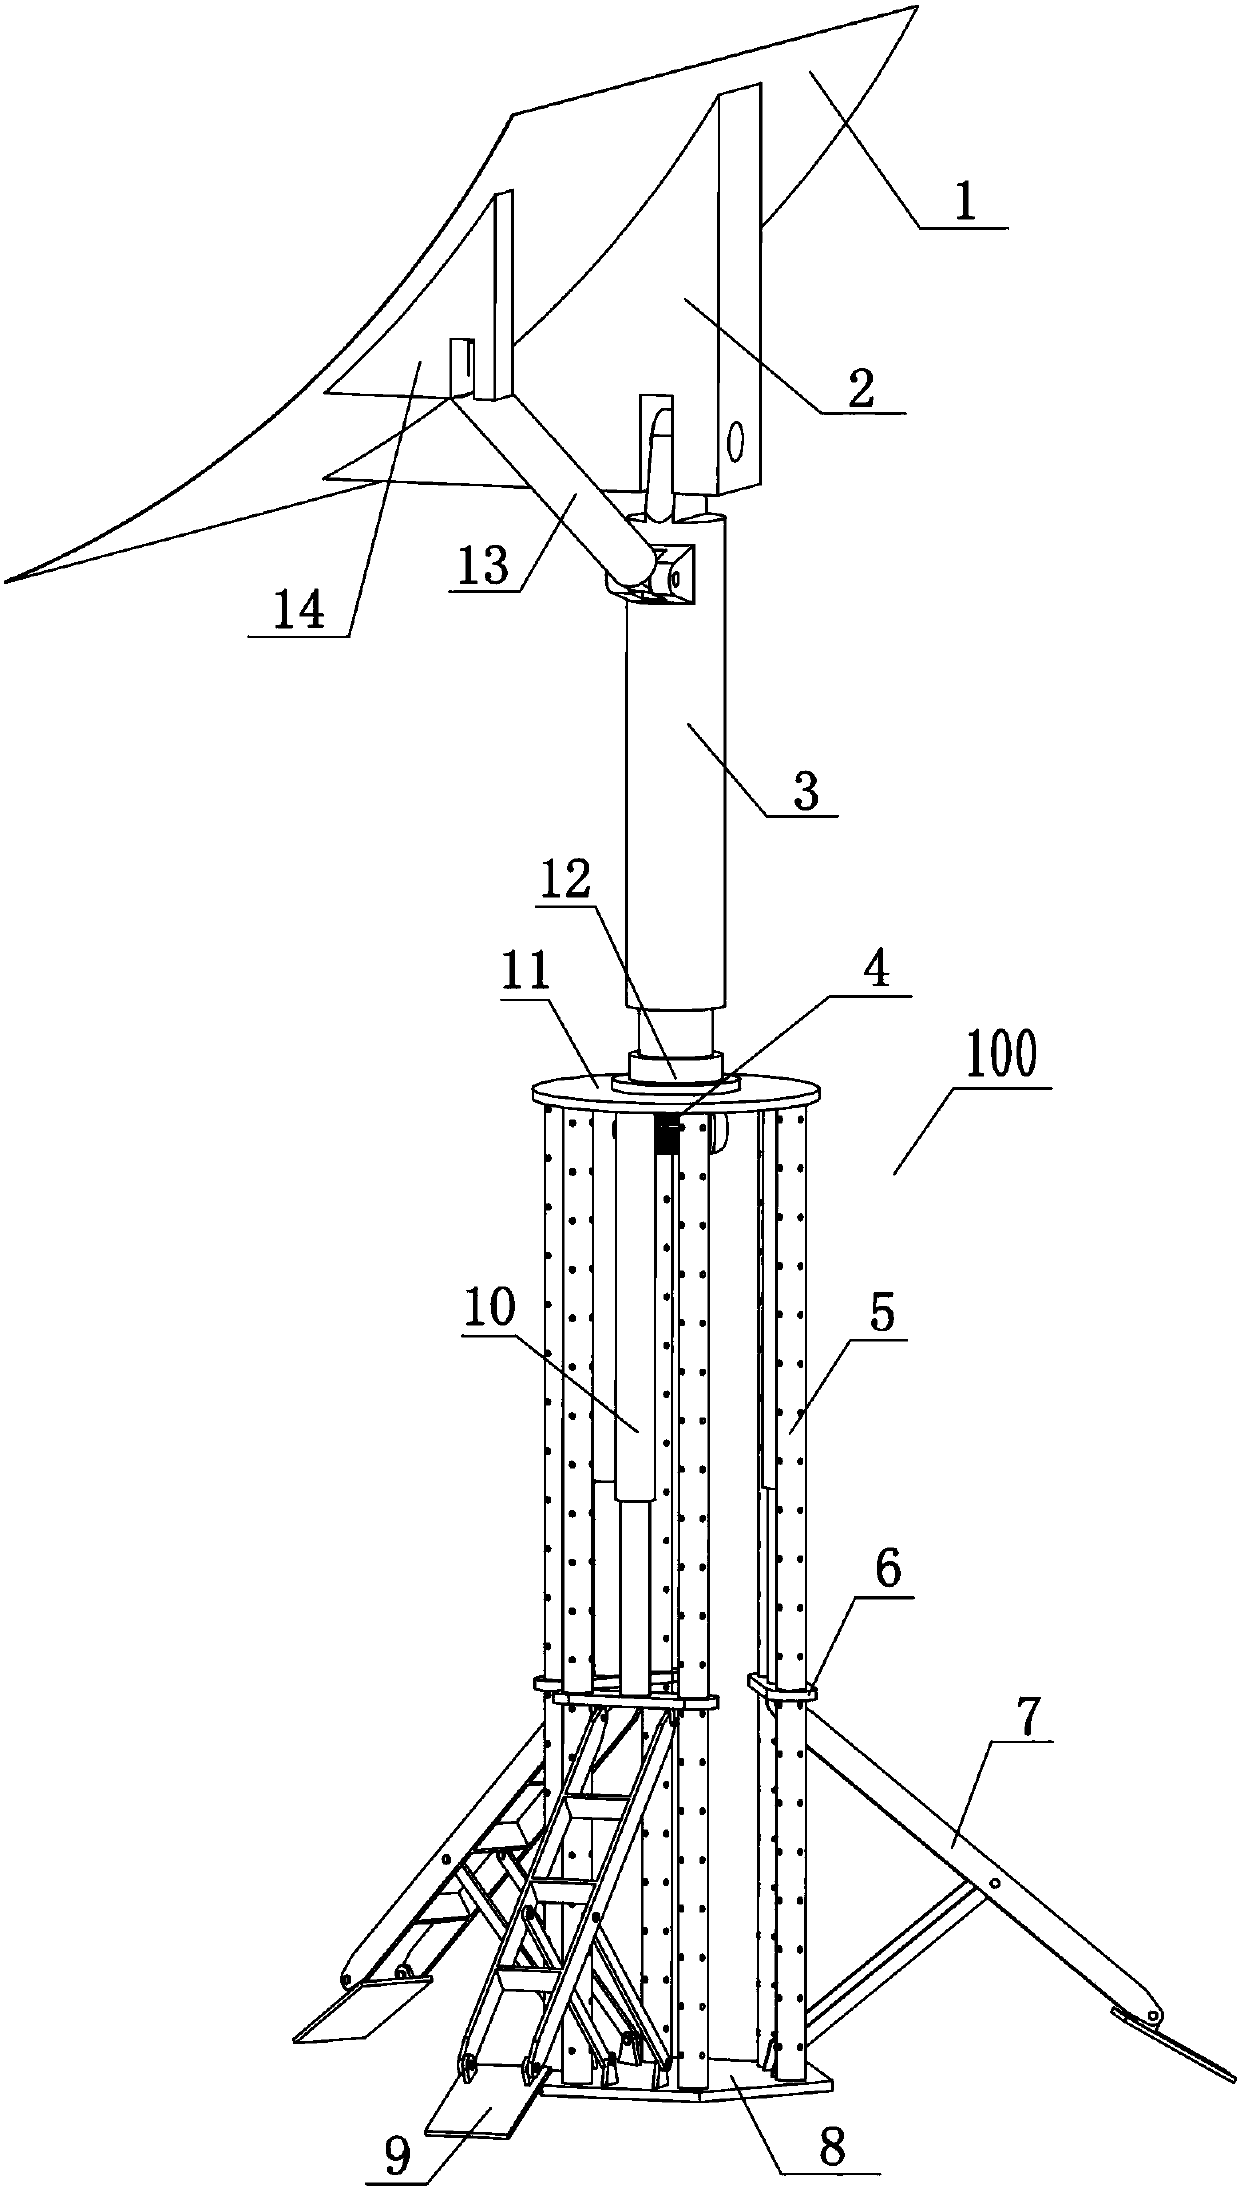 On-bottom and off-bottom supporting device for manned submersible